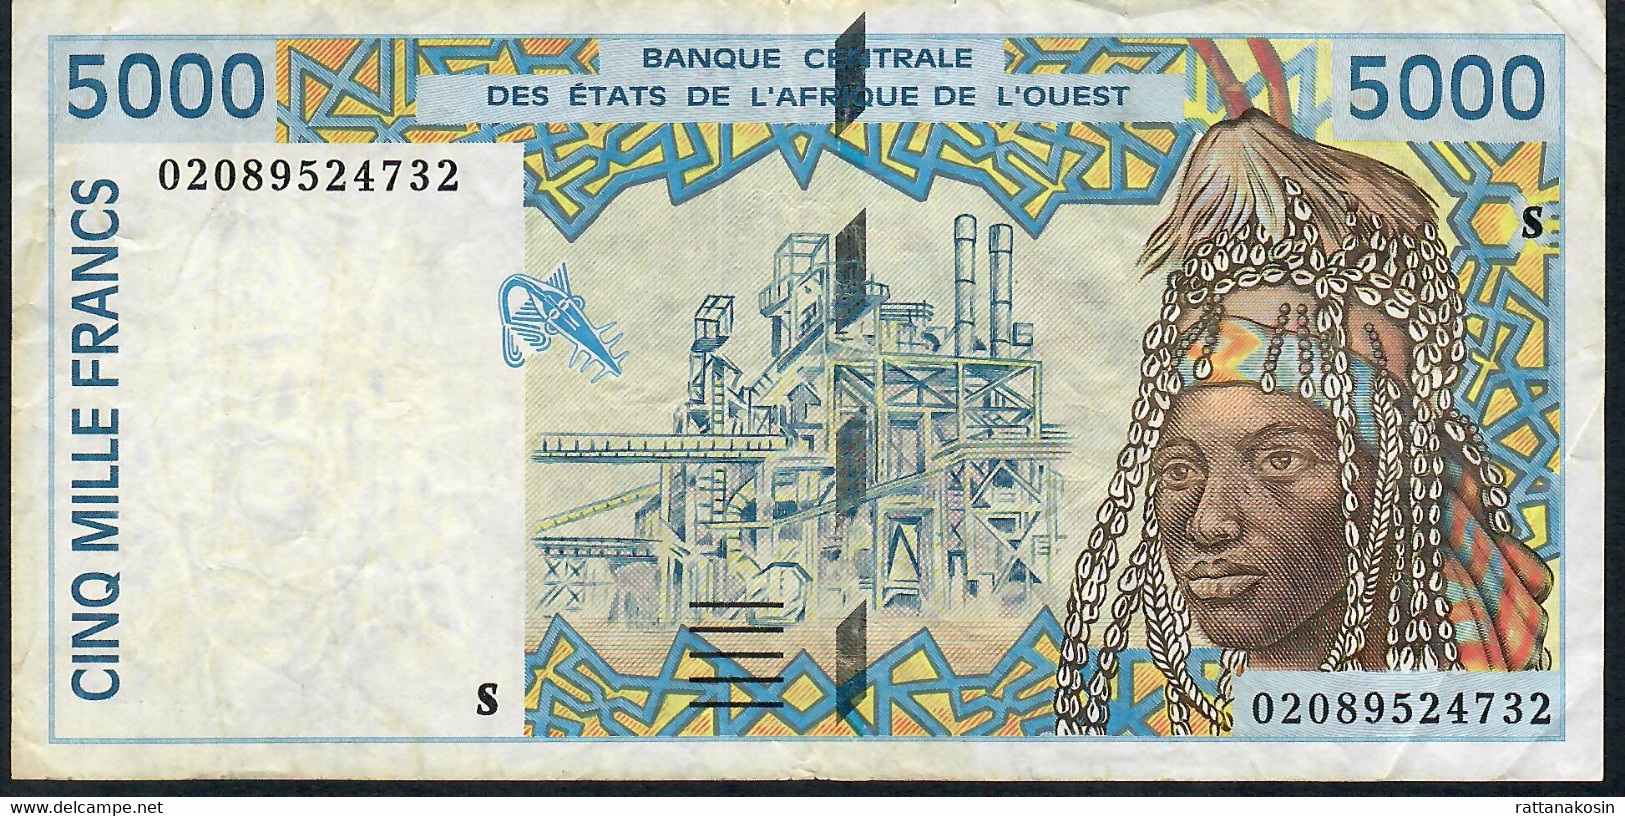 W.A.S. P913Sg 5000 FRANCS (20)02 2002  Signature 31  AVF NO P.h. - West African States